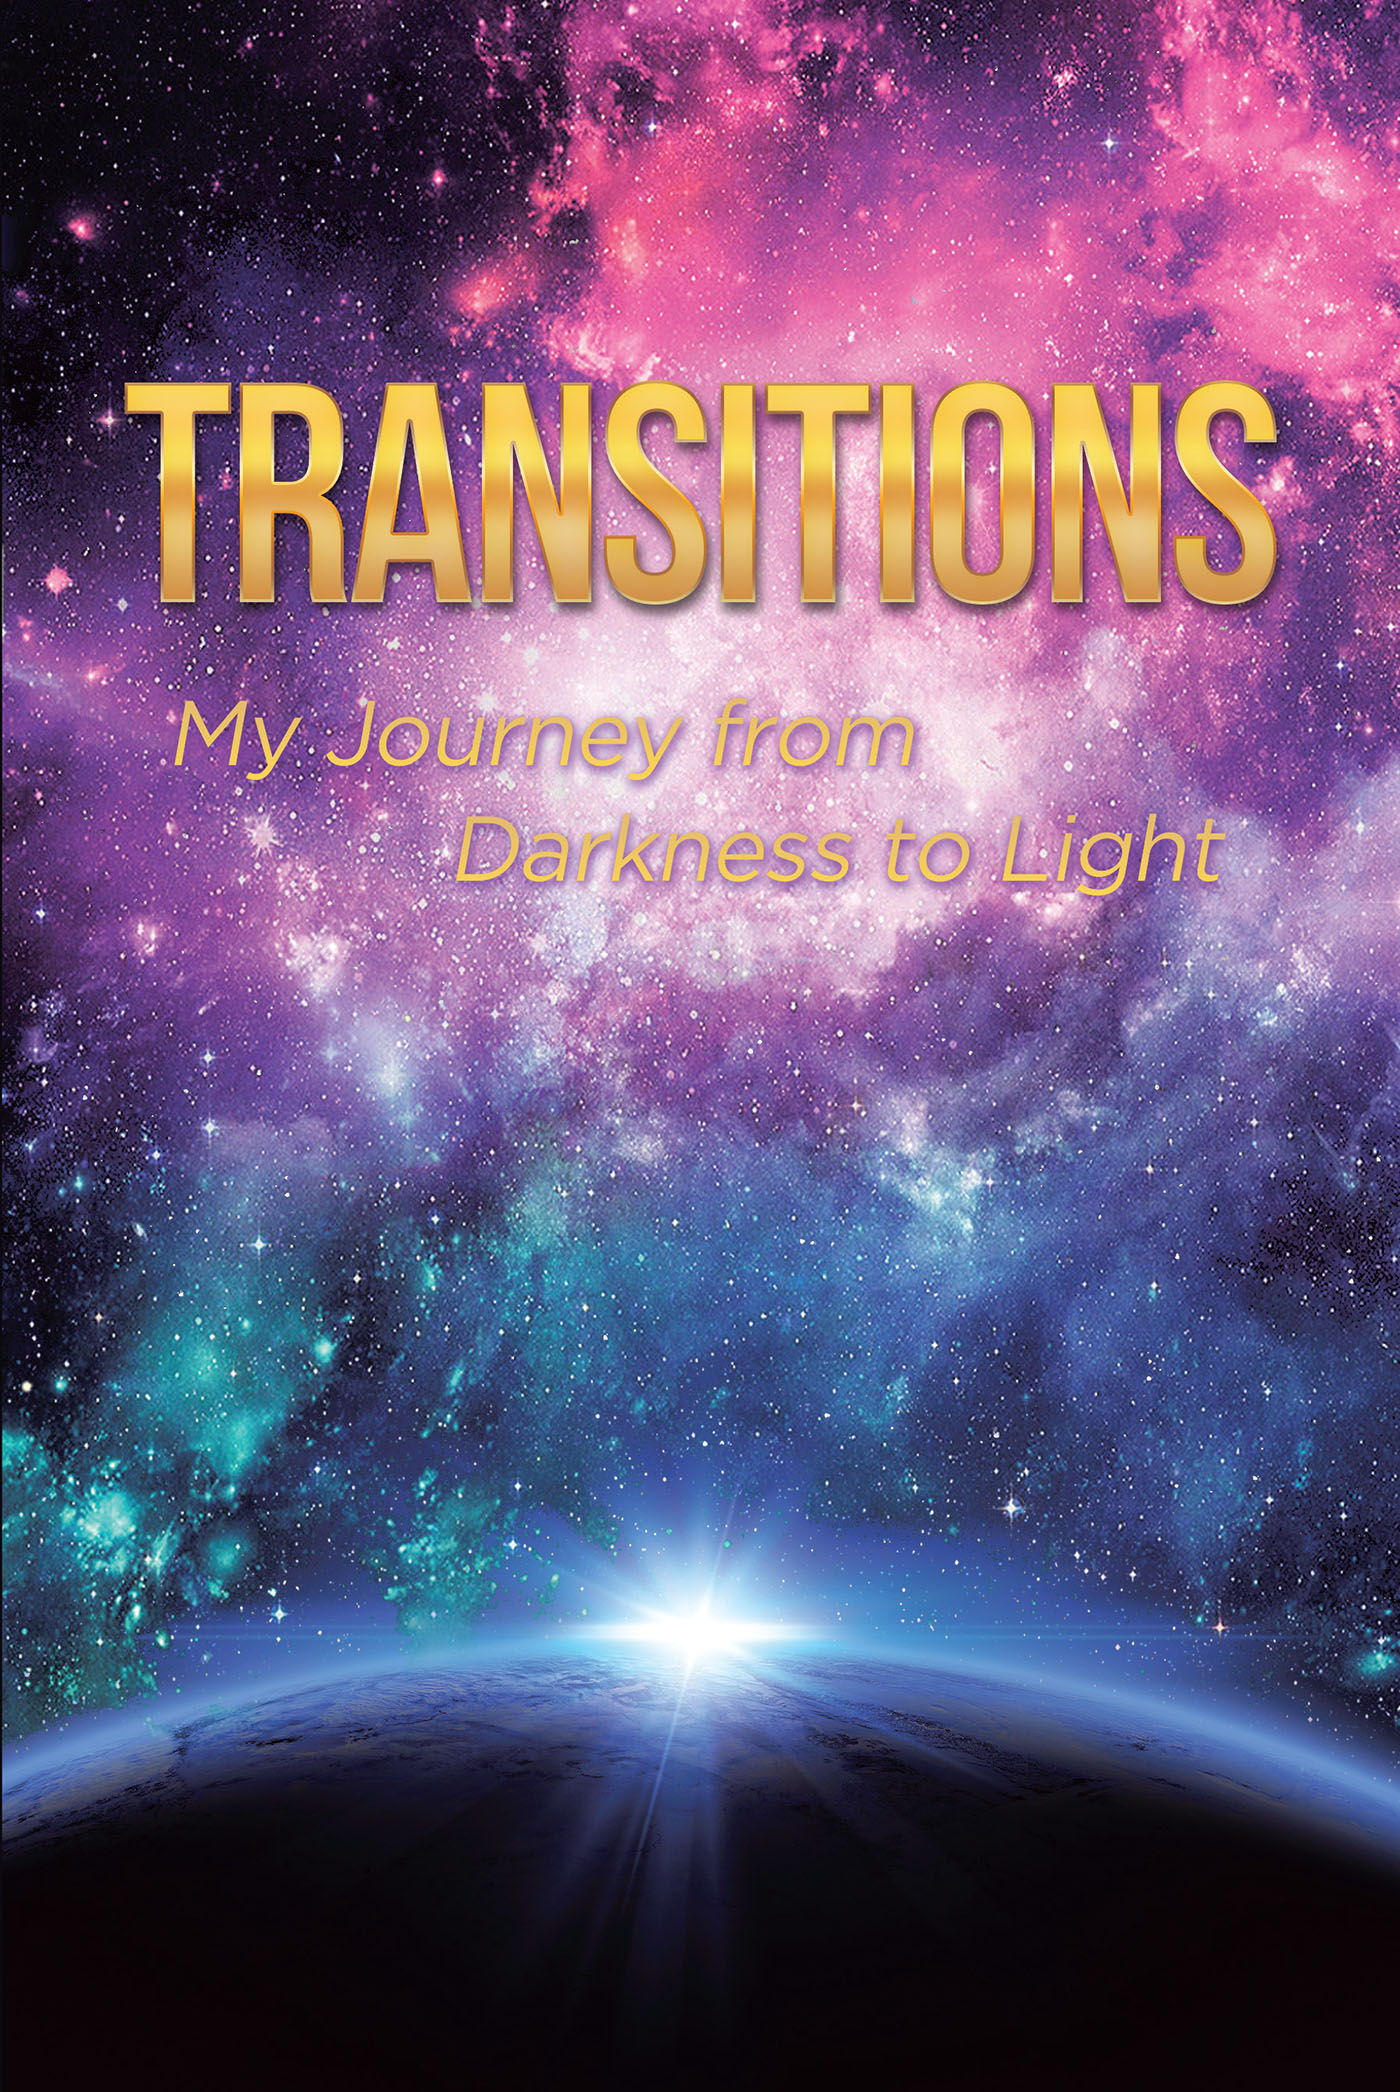 Transitions Cover Image